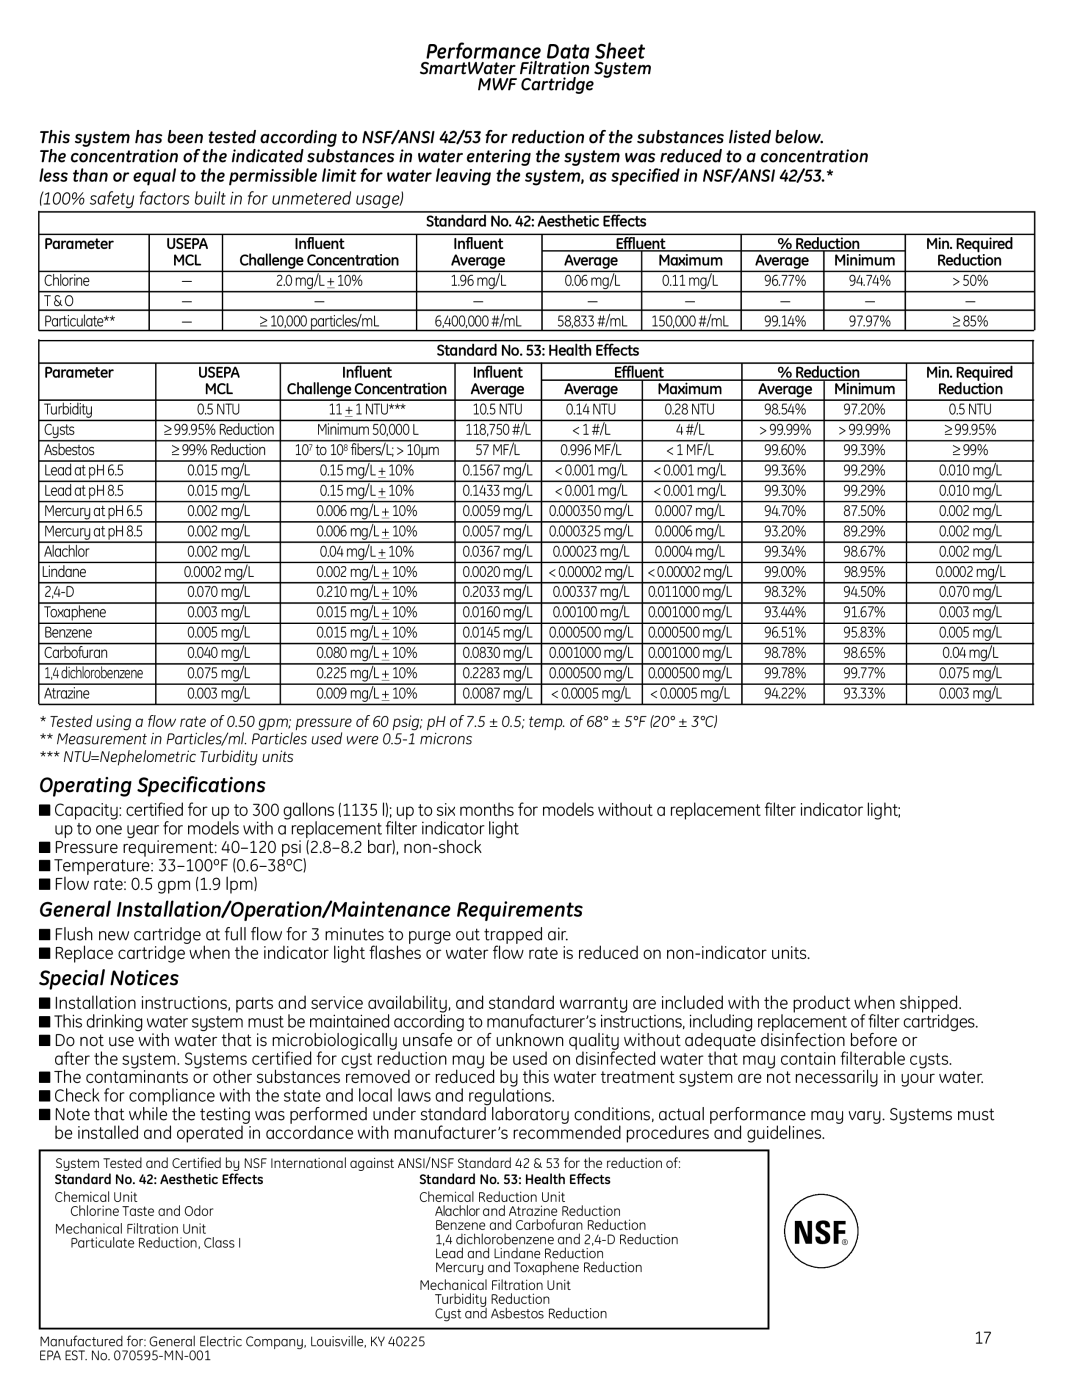 GE Monogram Bottom-Freezer Built-In Refrigerator Performance Data Sheet, Operating Specifications, Special Notices 